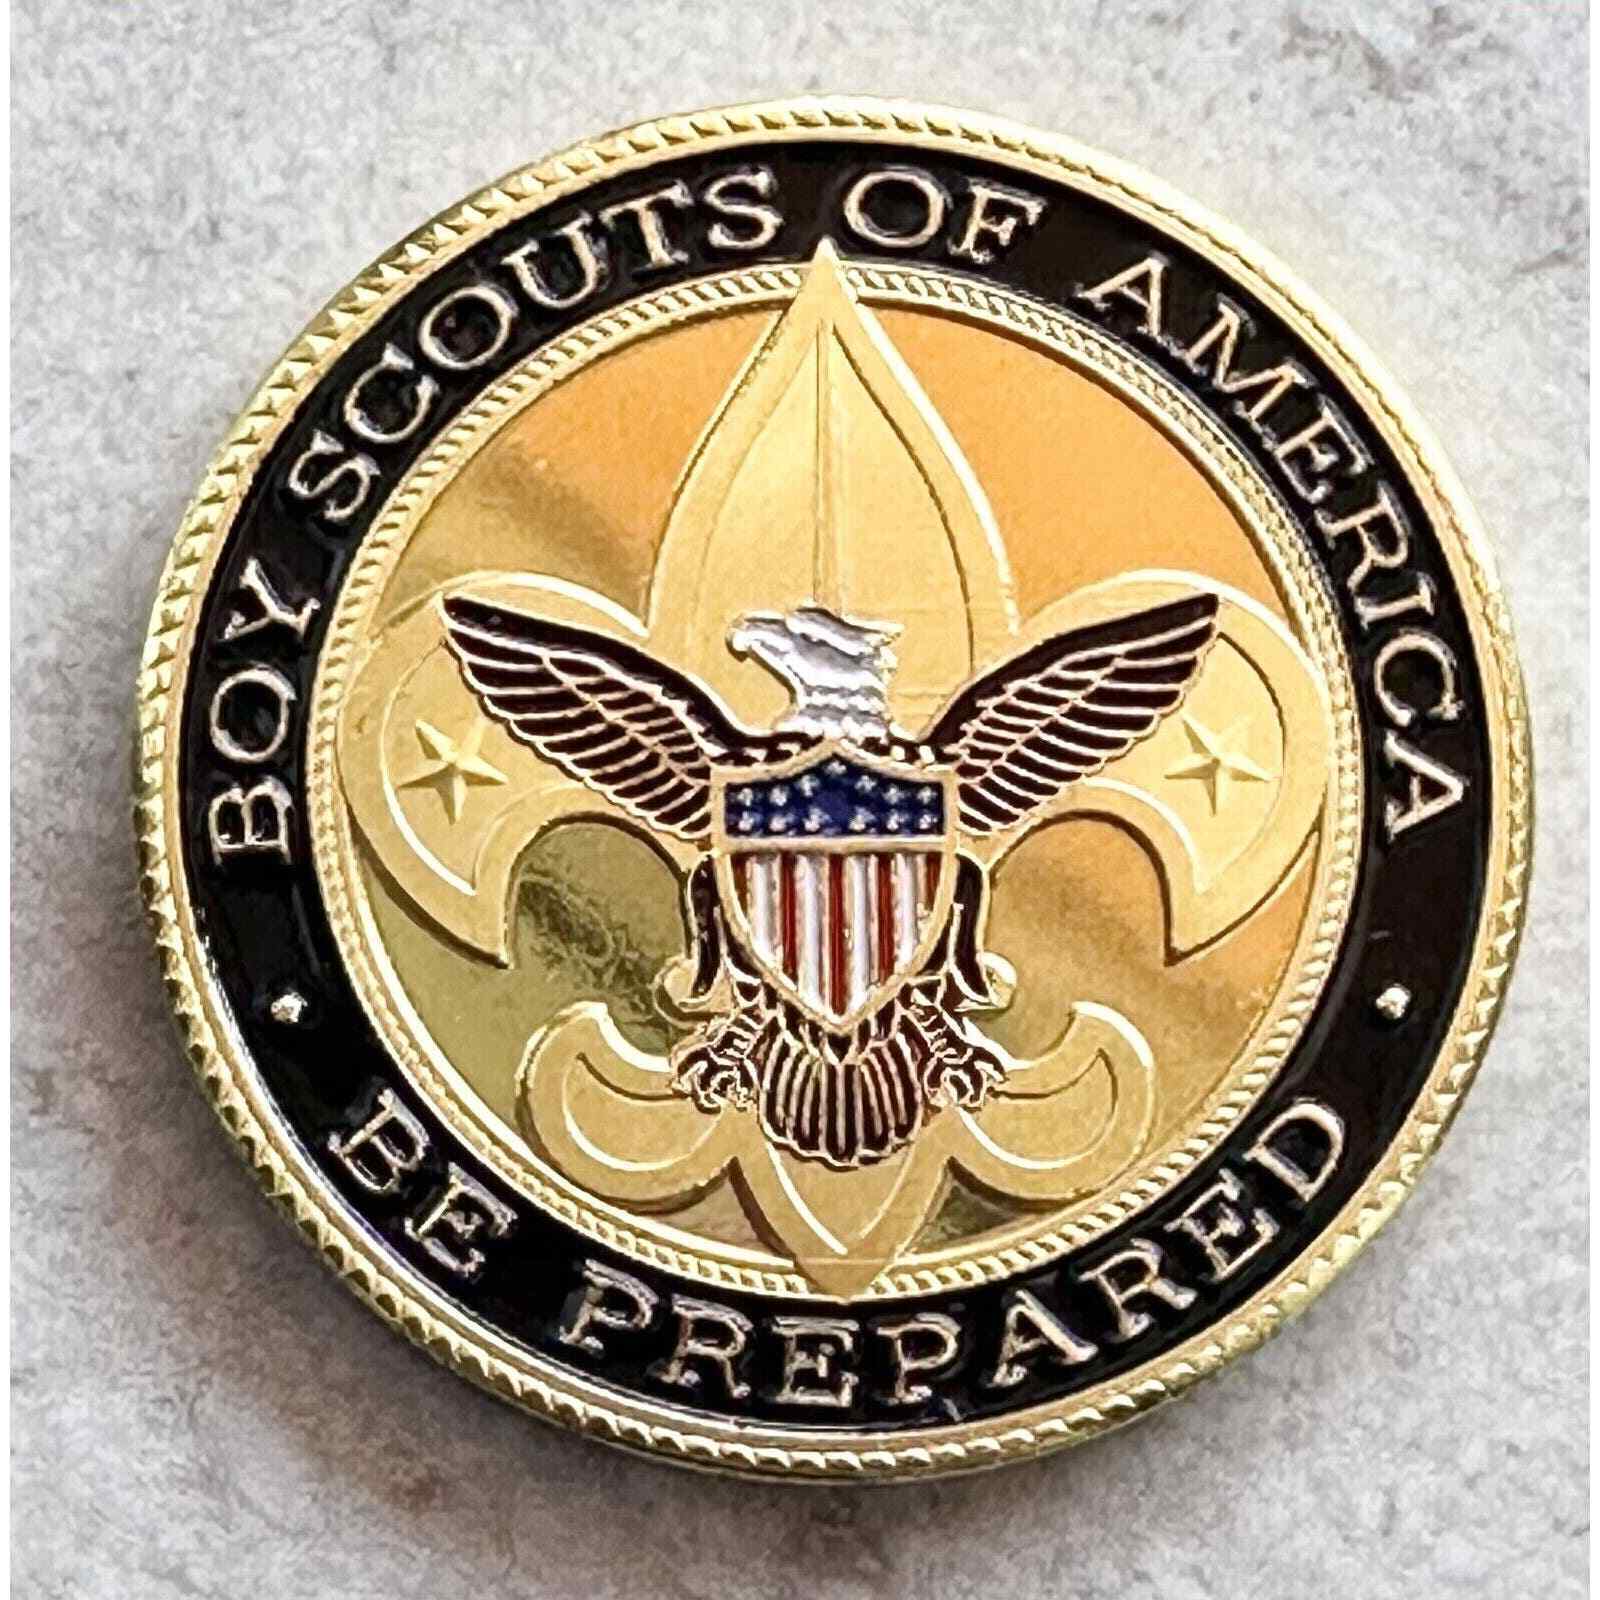 BOY SCOUTS OF AMERICA Challenge Coin